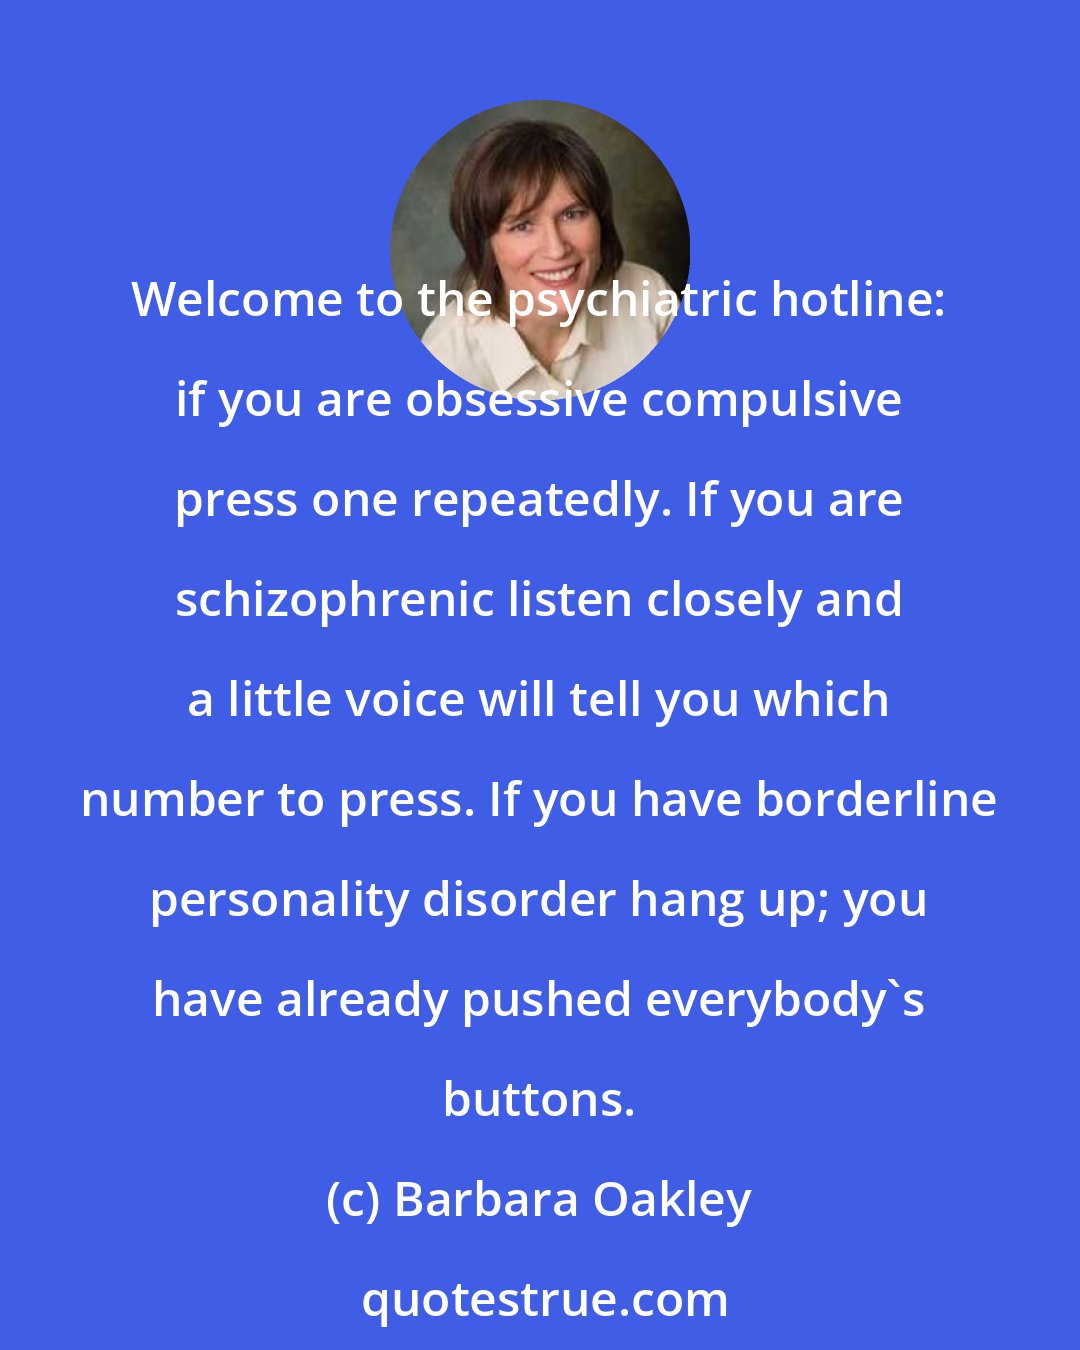 Barbara Oakley: Welcome to the psychiatric hotline: if you are obsessive compulsive press one repeatedly. If you are schizophrenic listen closely and a little voice will tell you which number to press. If you have borderline personality disorder hang up; you have already pushed everybody's buttons.